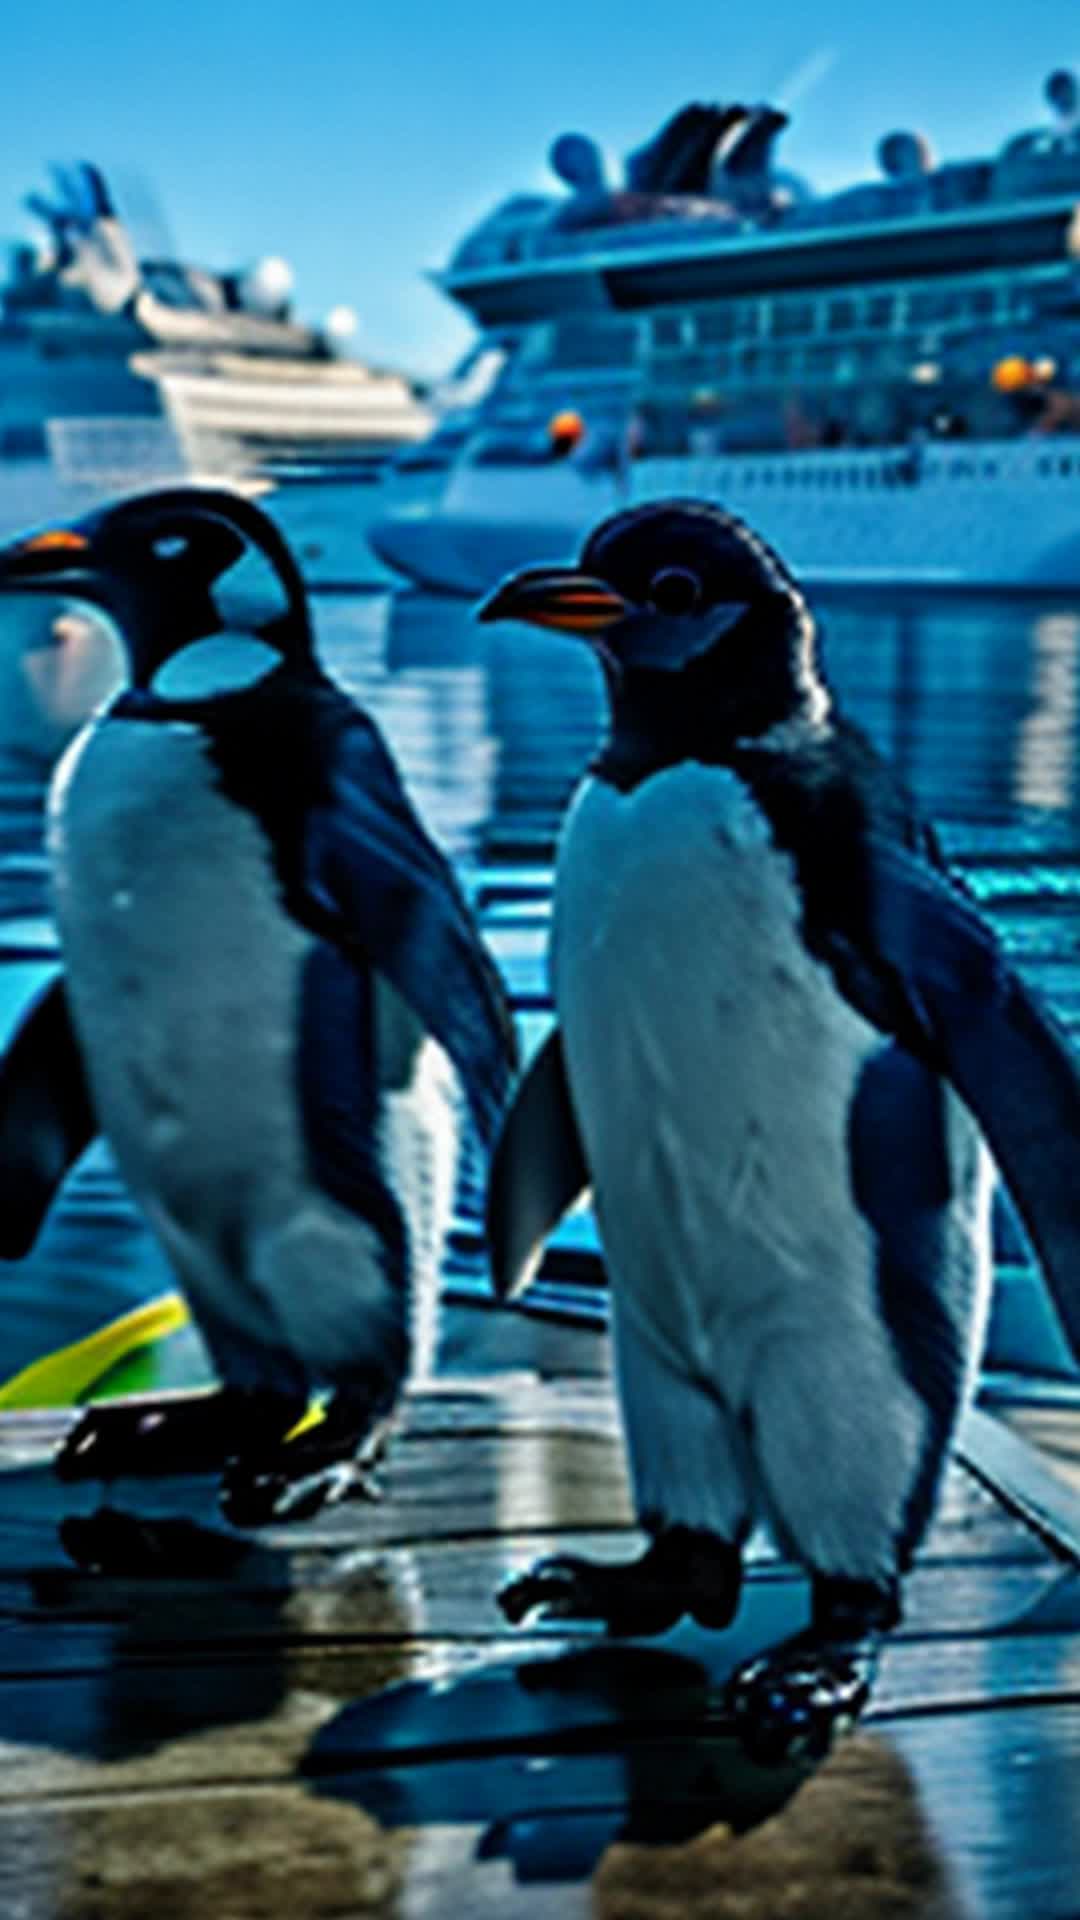 Penguins waddling stealthily onto dock, Antarctica, massive cruise ship shimmering under bright sun, clear sky, sharp focus, high resolution